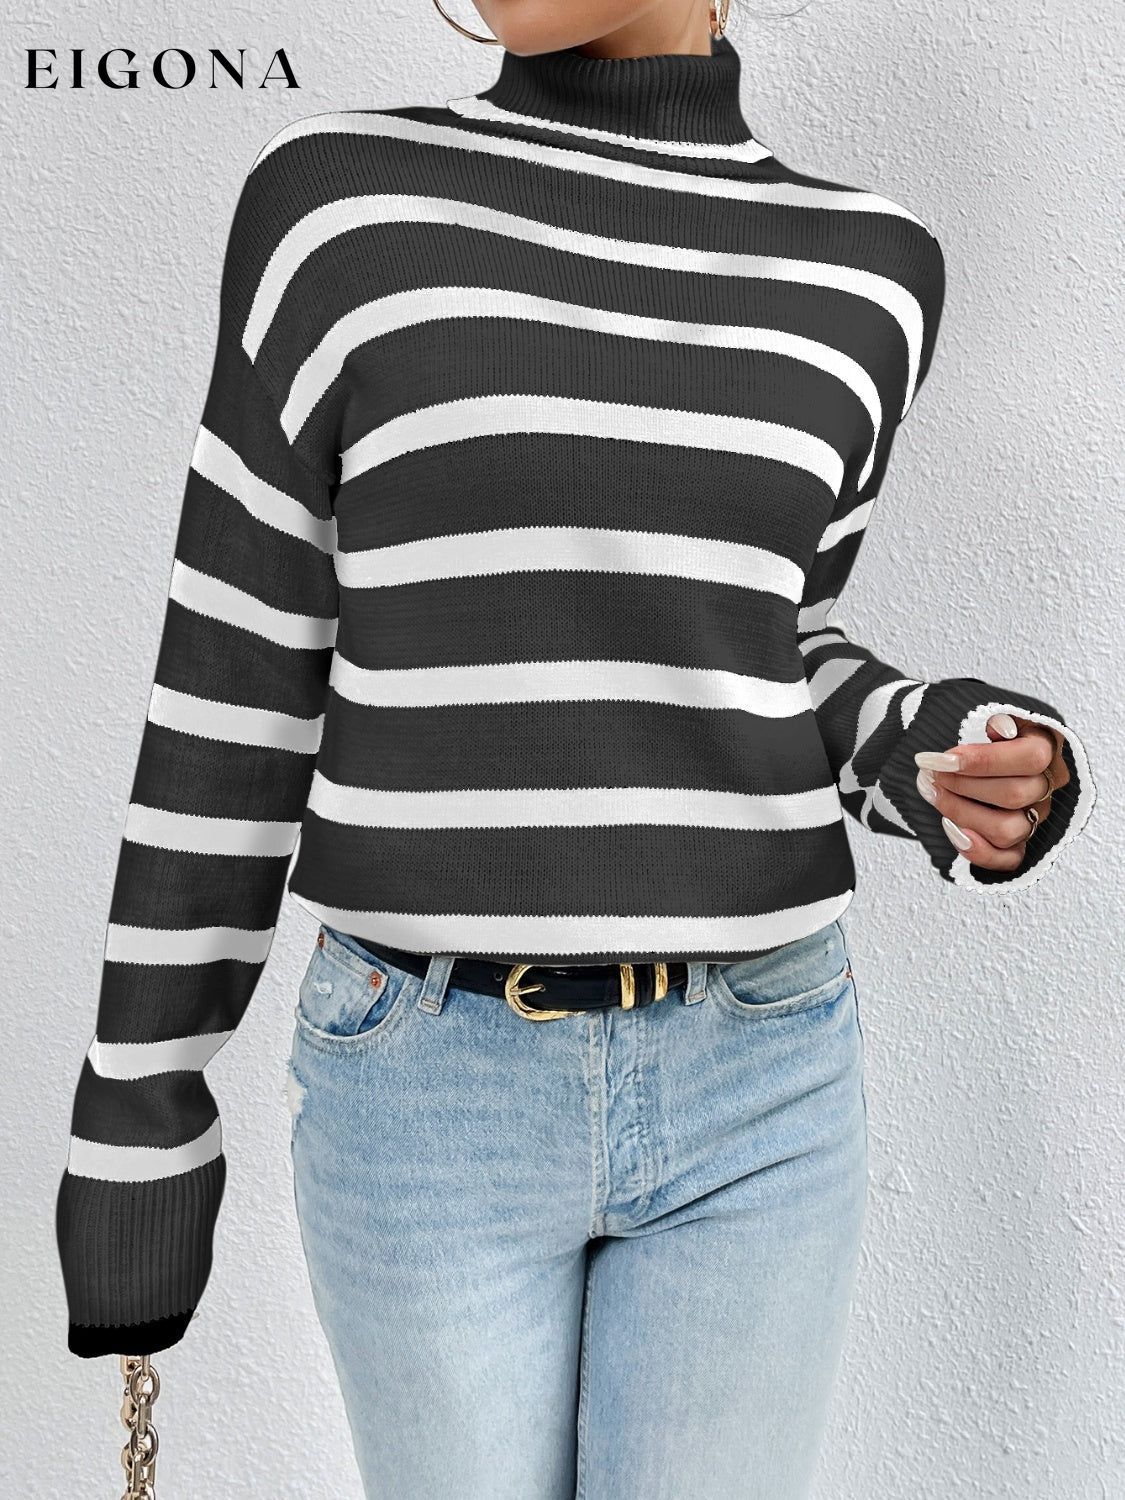 Striped Turtleneck Drop Shoulder Sweater Black clothes long sleeve shirt Ship From Overseas striped sweater sweater Yh